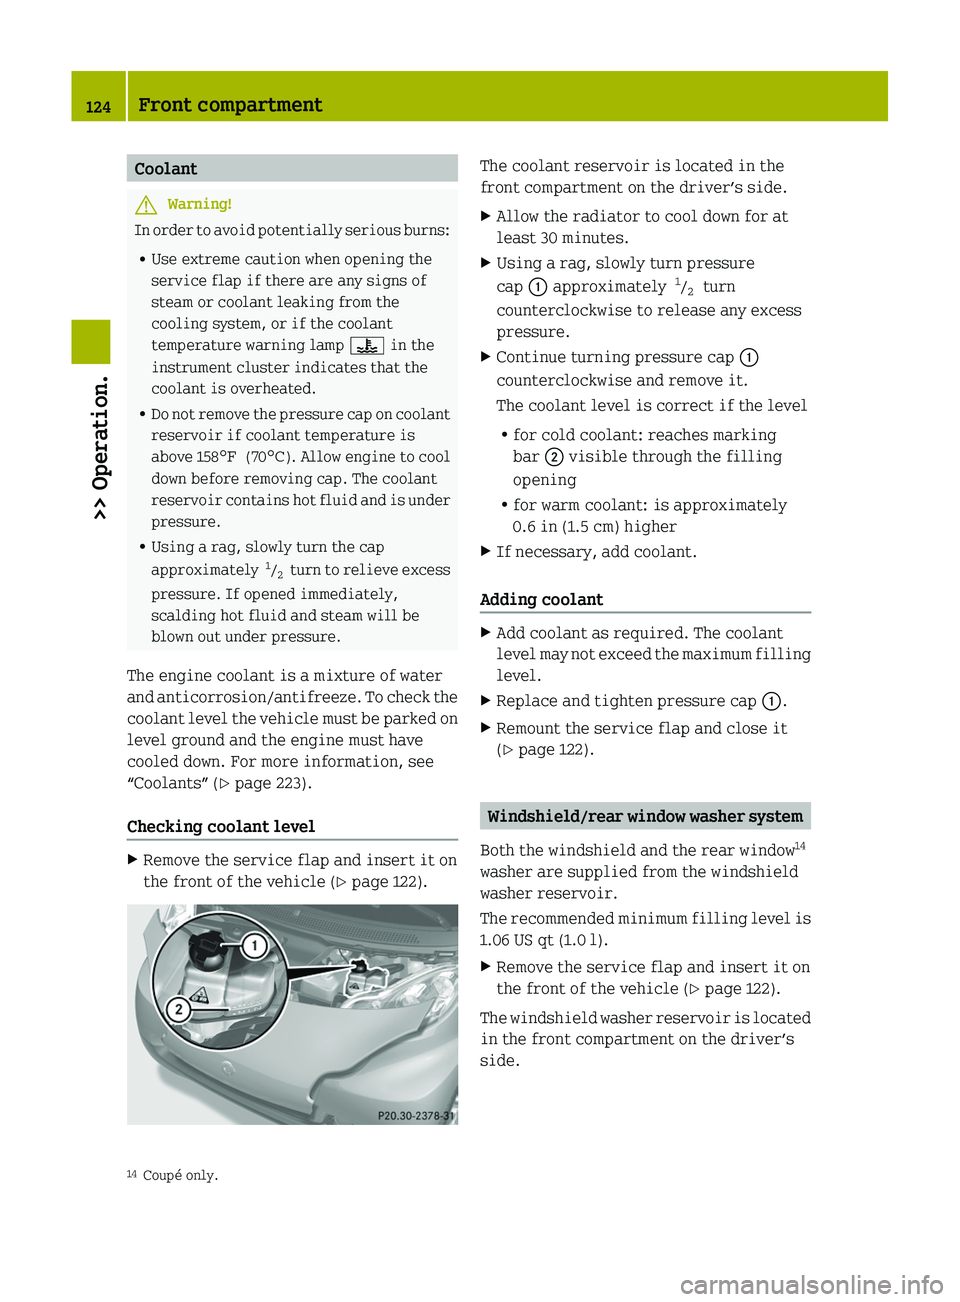 SMART FORTWO COUPE 2011  Owners Manual CoolantGWarning!
In order to avoid potentially serious burns:
RUse extreme caution when opening the
service flap if there are any signs of
steam or coolant leaking from the
cooling system, or if the c